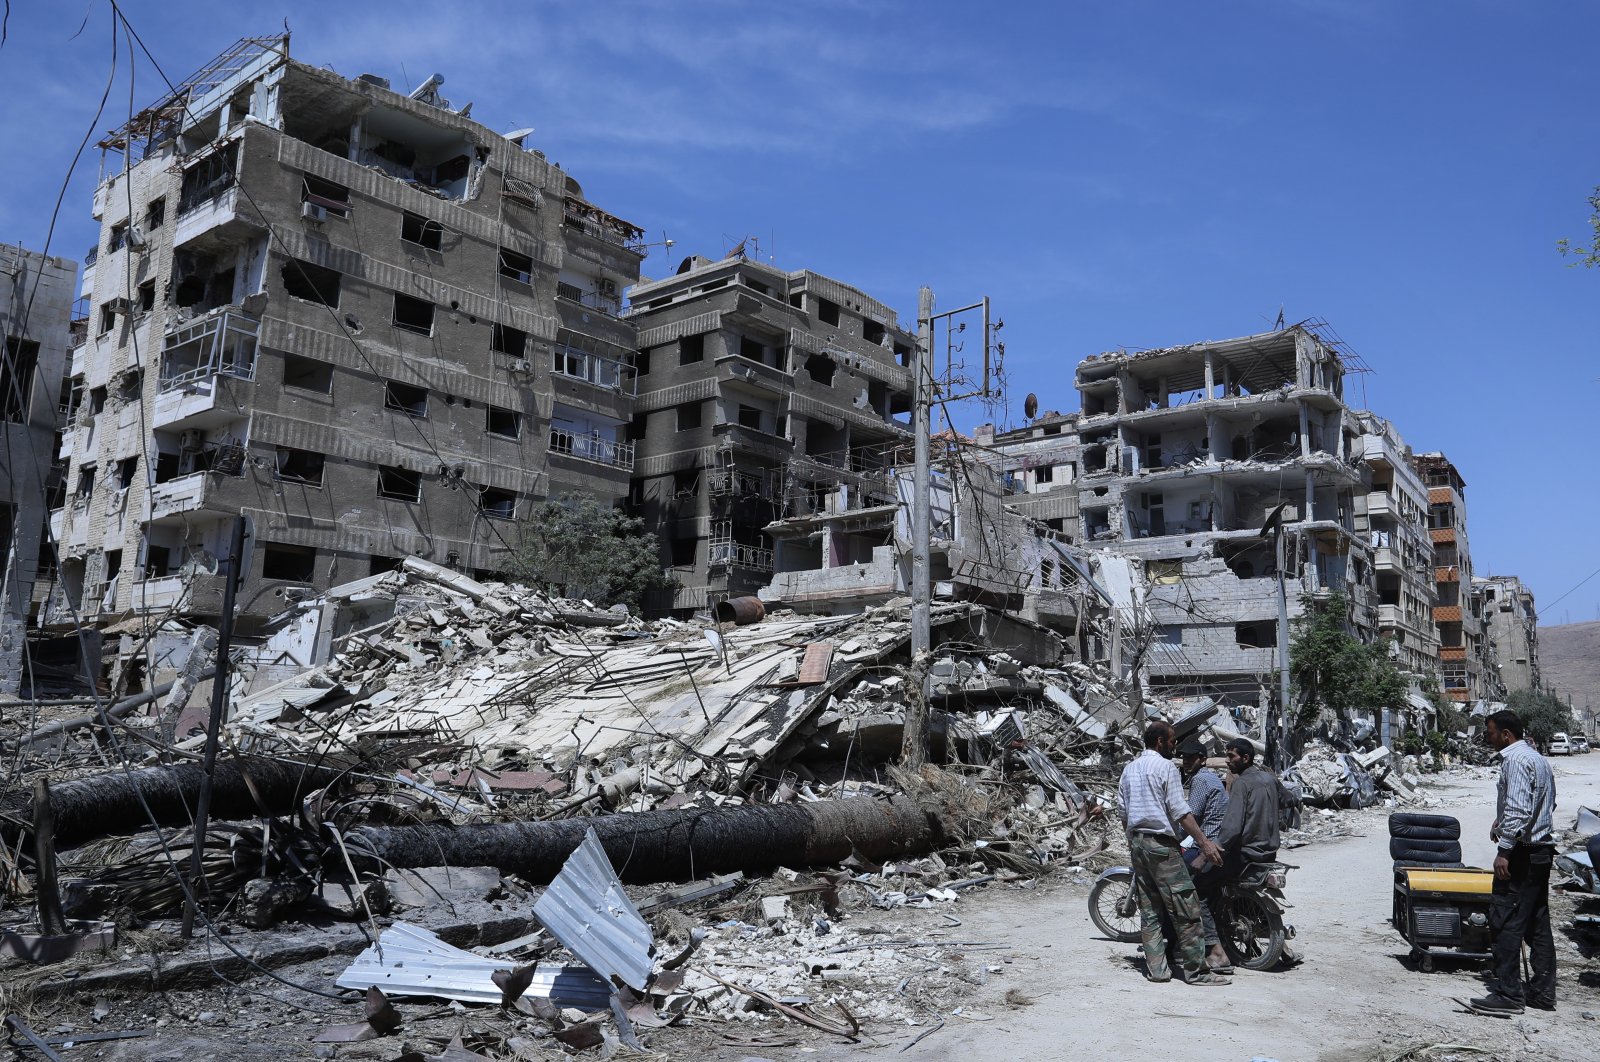 People stand in front of damaged buildings, in the town of Douma, the site of a suspected chemical weapons attack, near Damascus, Syria, April 16, 2018. (AP File Photo)